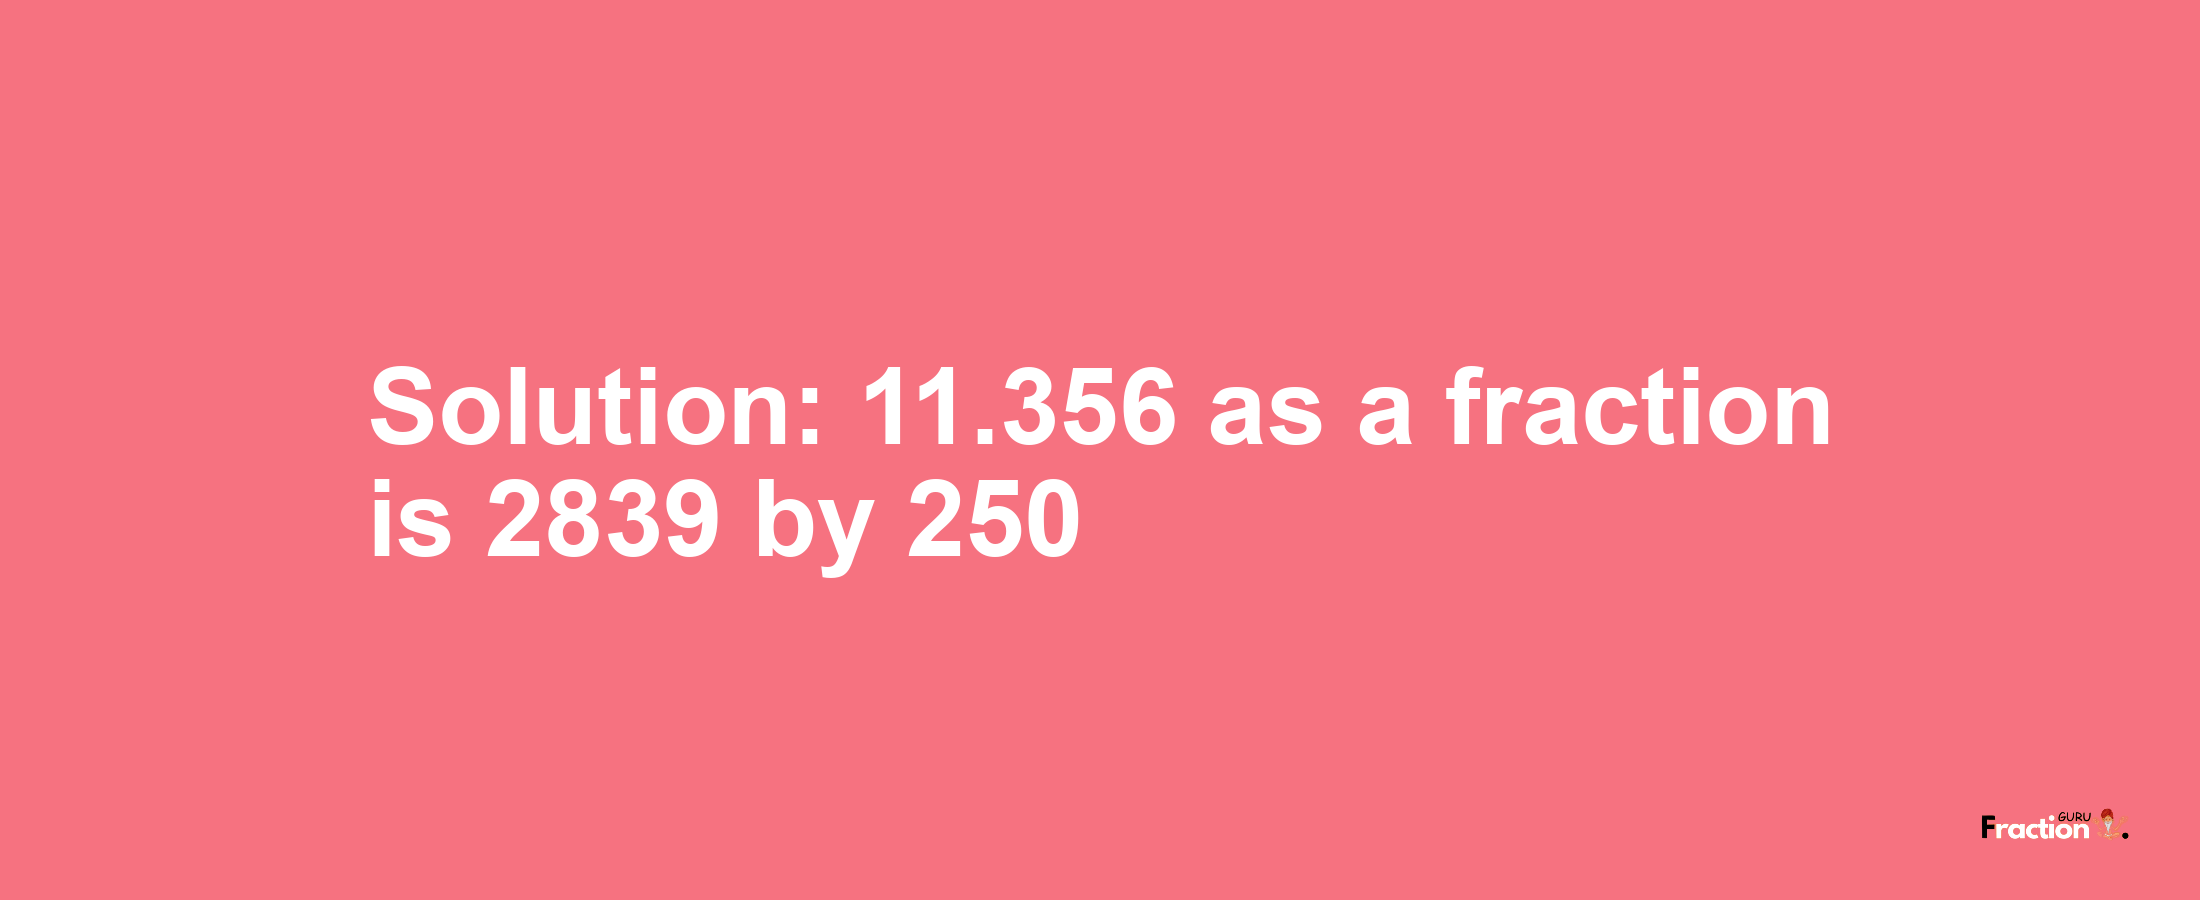 Solution:11.356 as a fraction is 2839/250